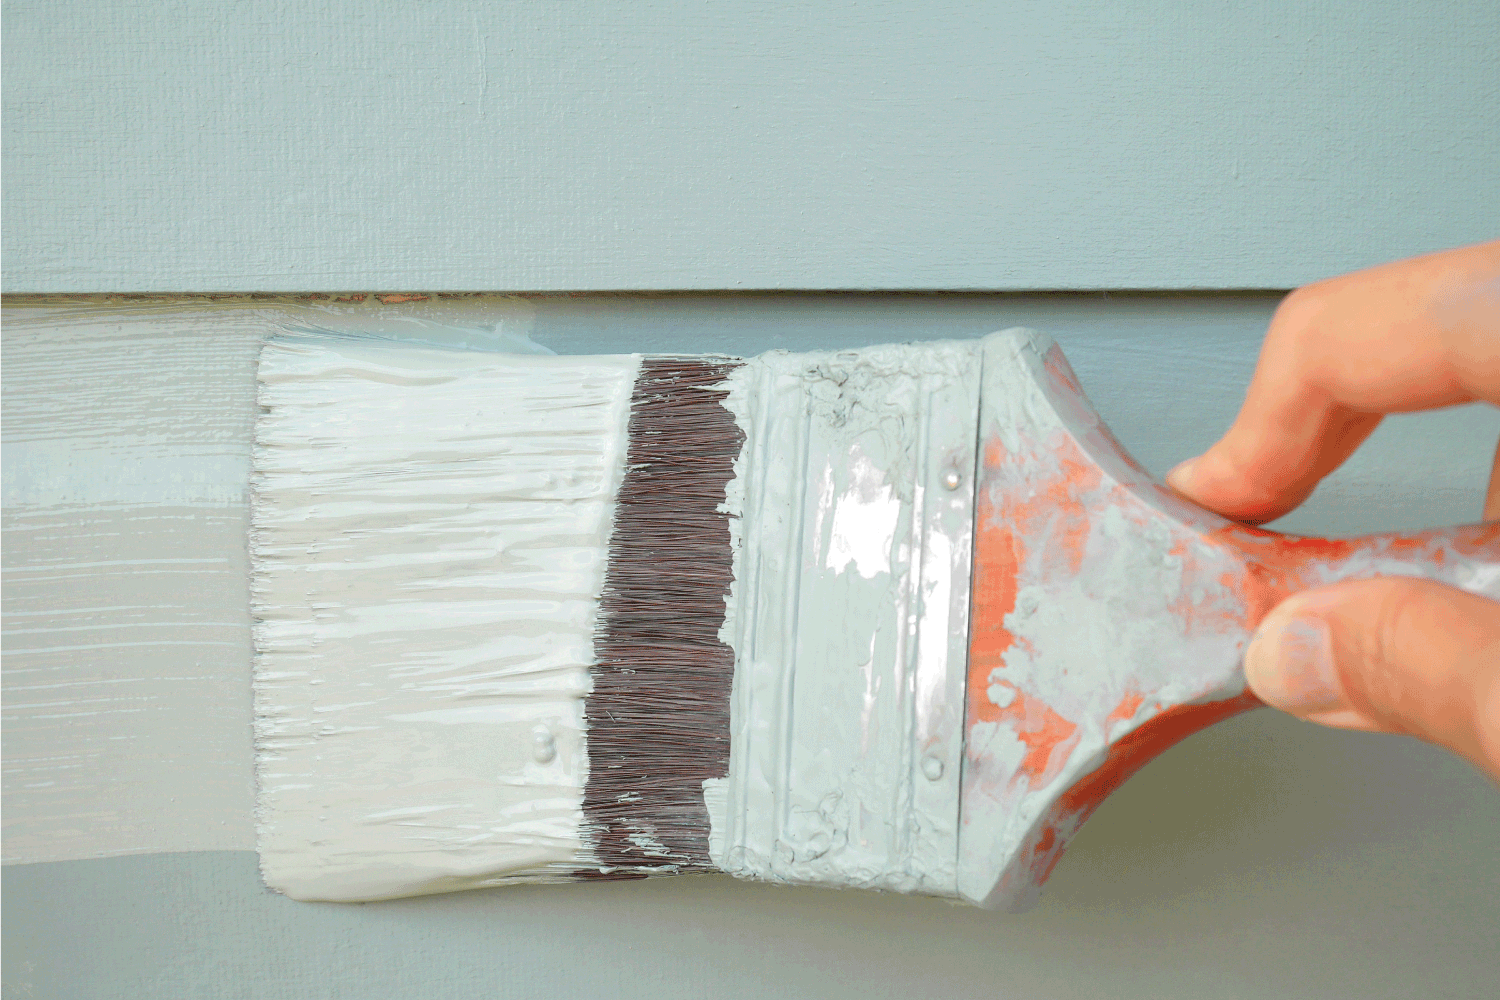 Hand holding brush painting timber wall